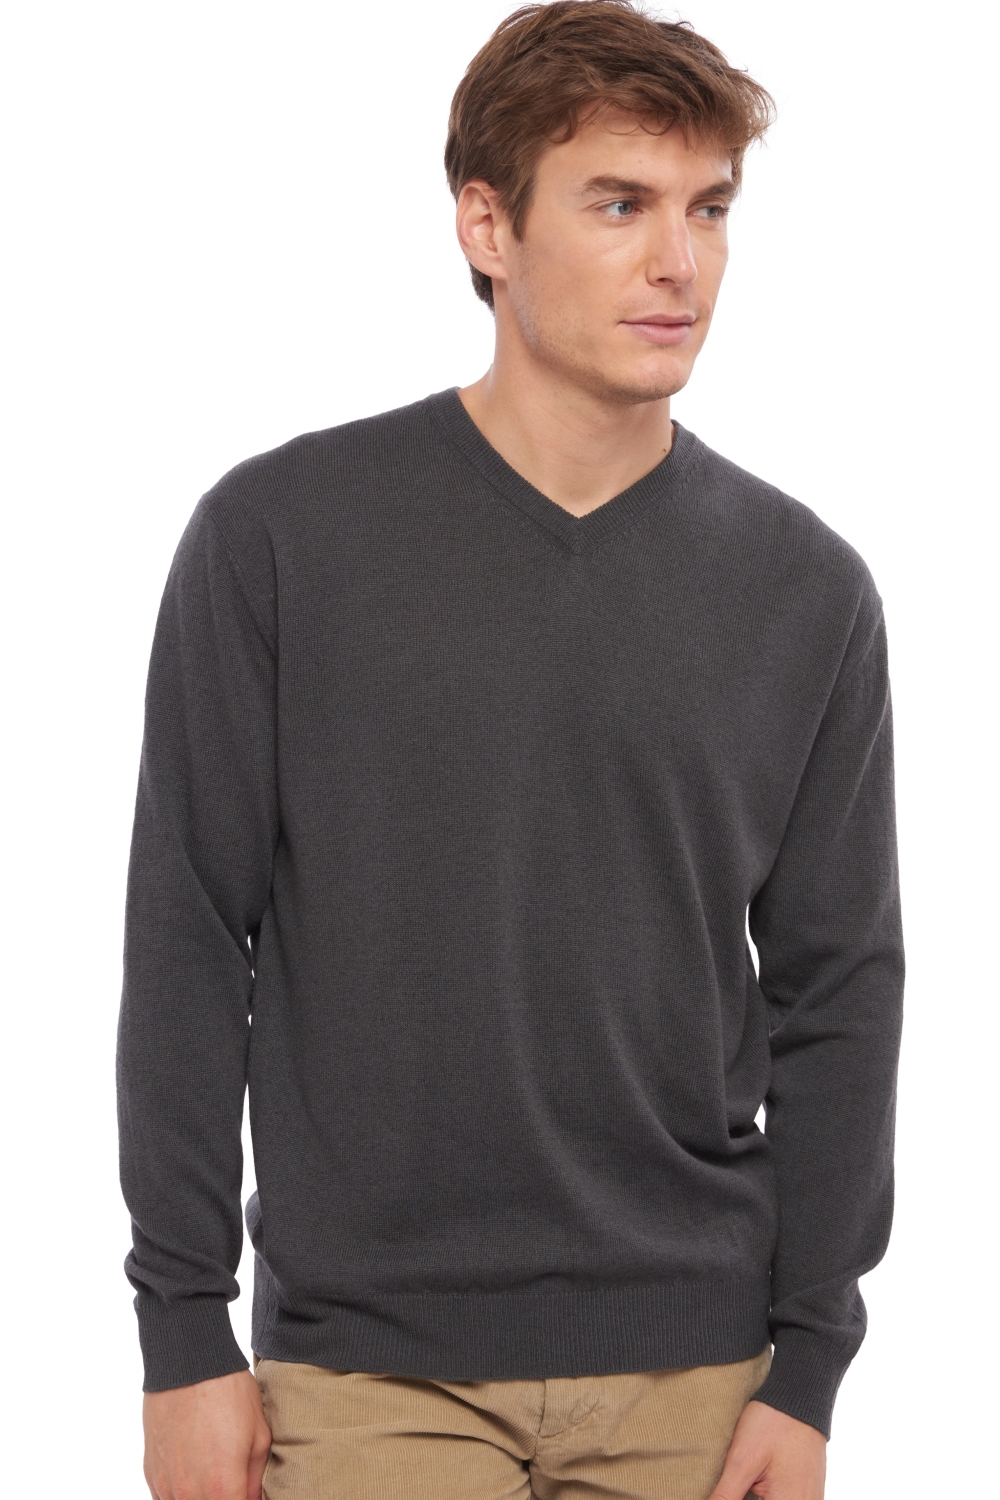 Cachemire pull homme gaspard anthracite xl